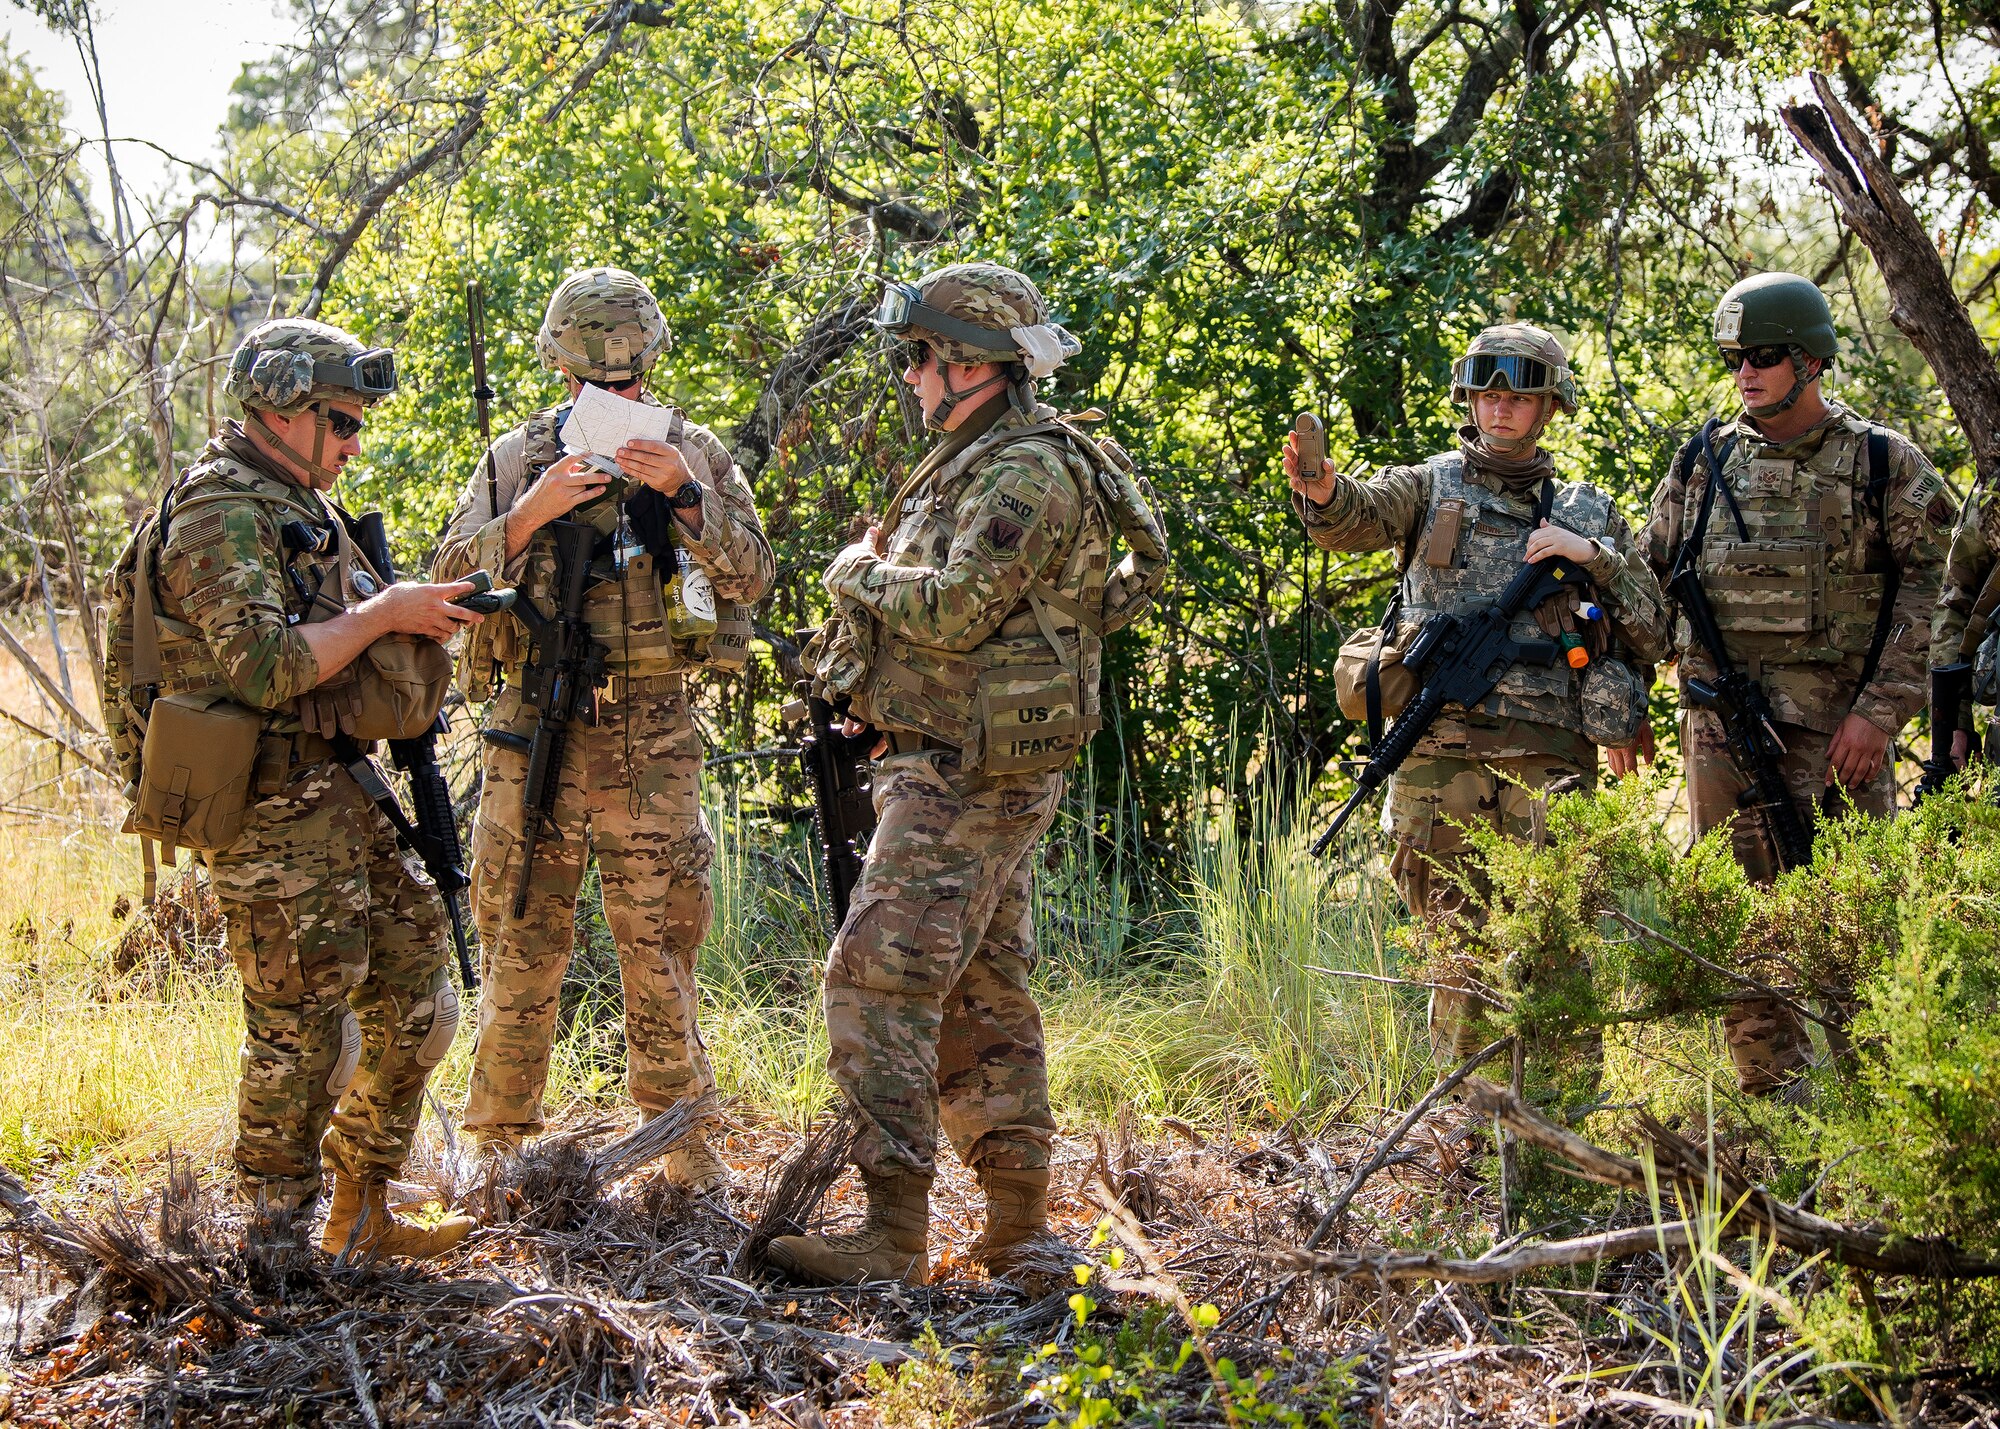 Staff Weather Officers from the 3d Weather Squadron, discuss strategy during a certification field exercise (CFX), July 31, 2019, at Camp Bowie Training Center, Texas. The CFX was designed to evaluate the squadron’s overall tactical ability and readiness to provide the U.S. Army with full spectrum environmental support to the Joint Task Force (JTF) fight. The CFX immersed Airmen into all the aspects of what could come with a deployment such as Land Navigation. (U.S. Air Force photo by Airman 1st Class Eugene Oliver)